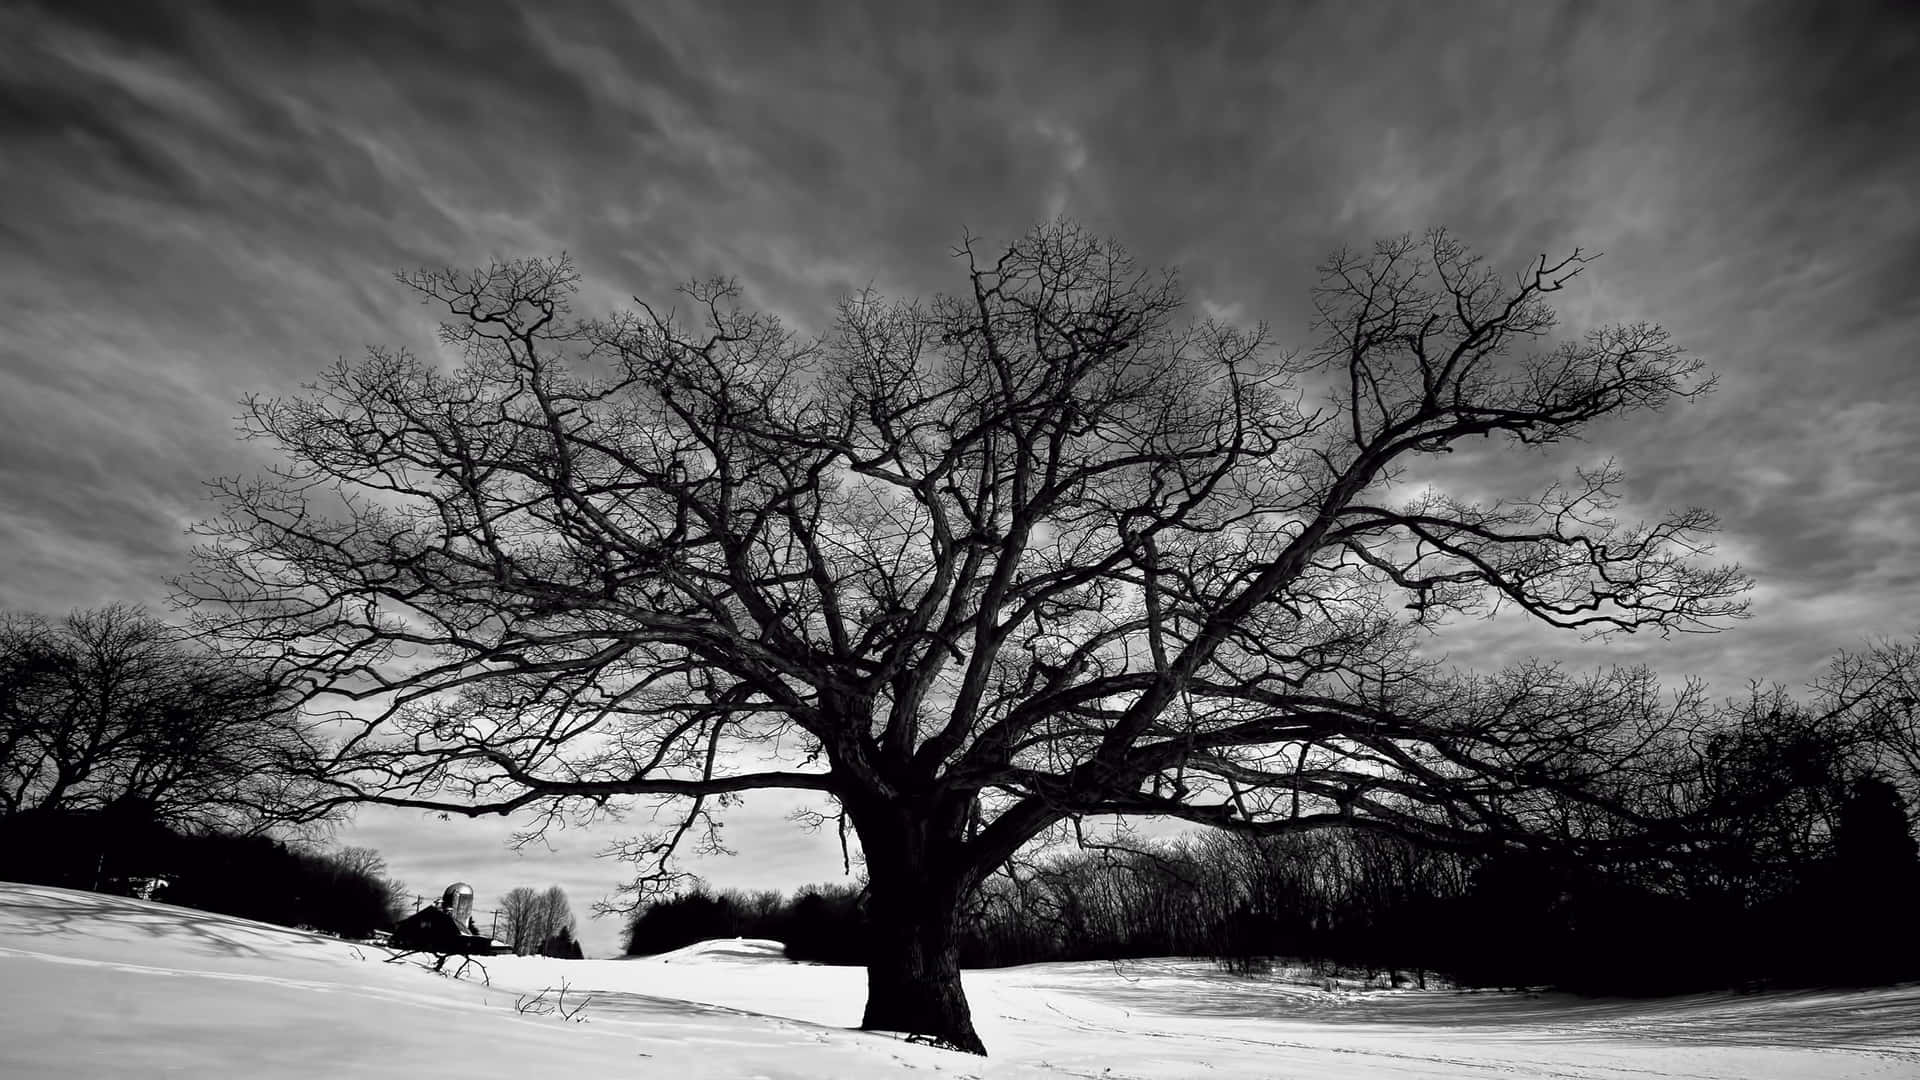 Captivating Black and White Tree Silhouette Wallpaper